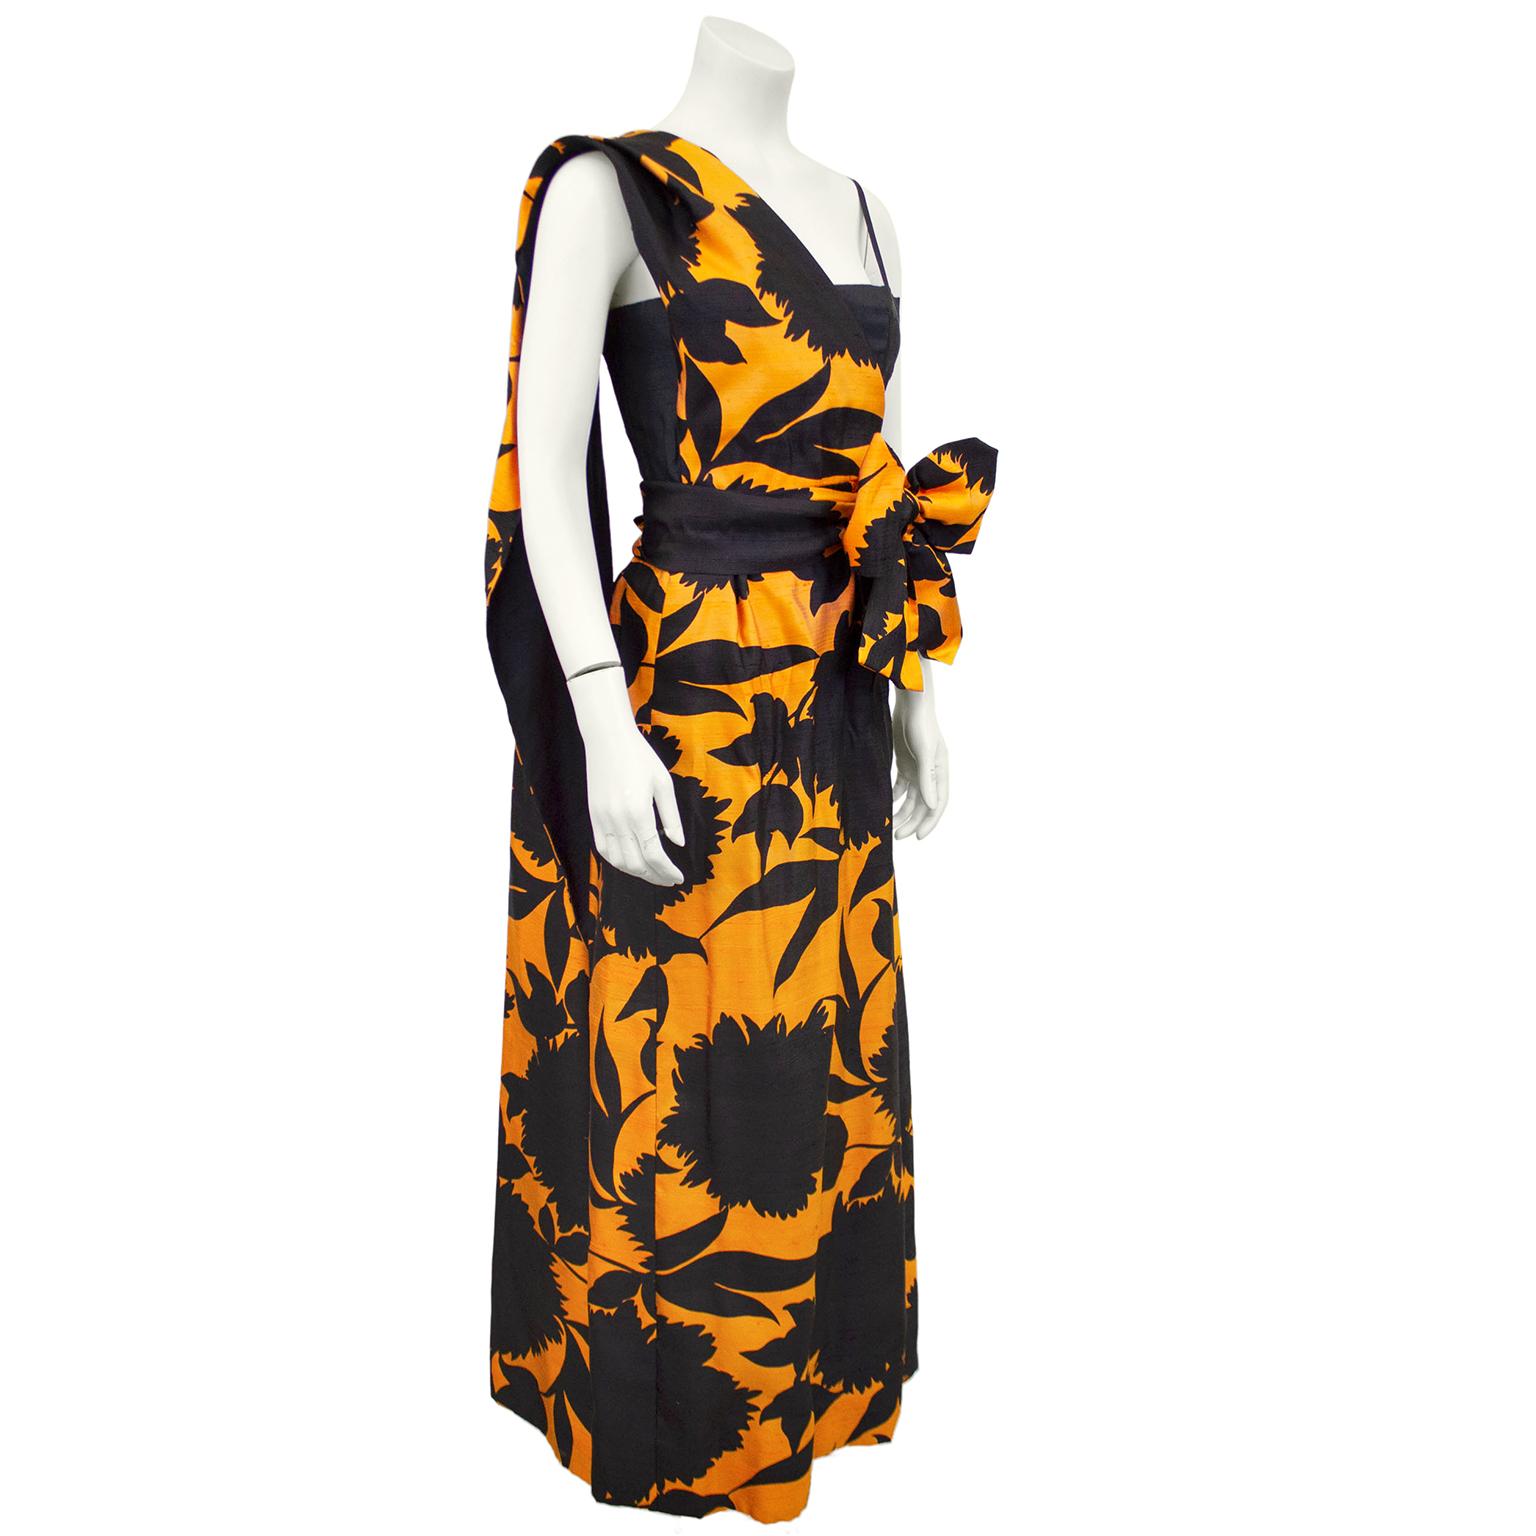 Beautiful French demi couture slubbed silk gown from the 1960's. Striking contrasting combination of orange and black. Black fitted corseted bodice with thin straps. Tea length skirt features an orange background with a black floral silhouette all